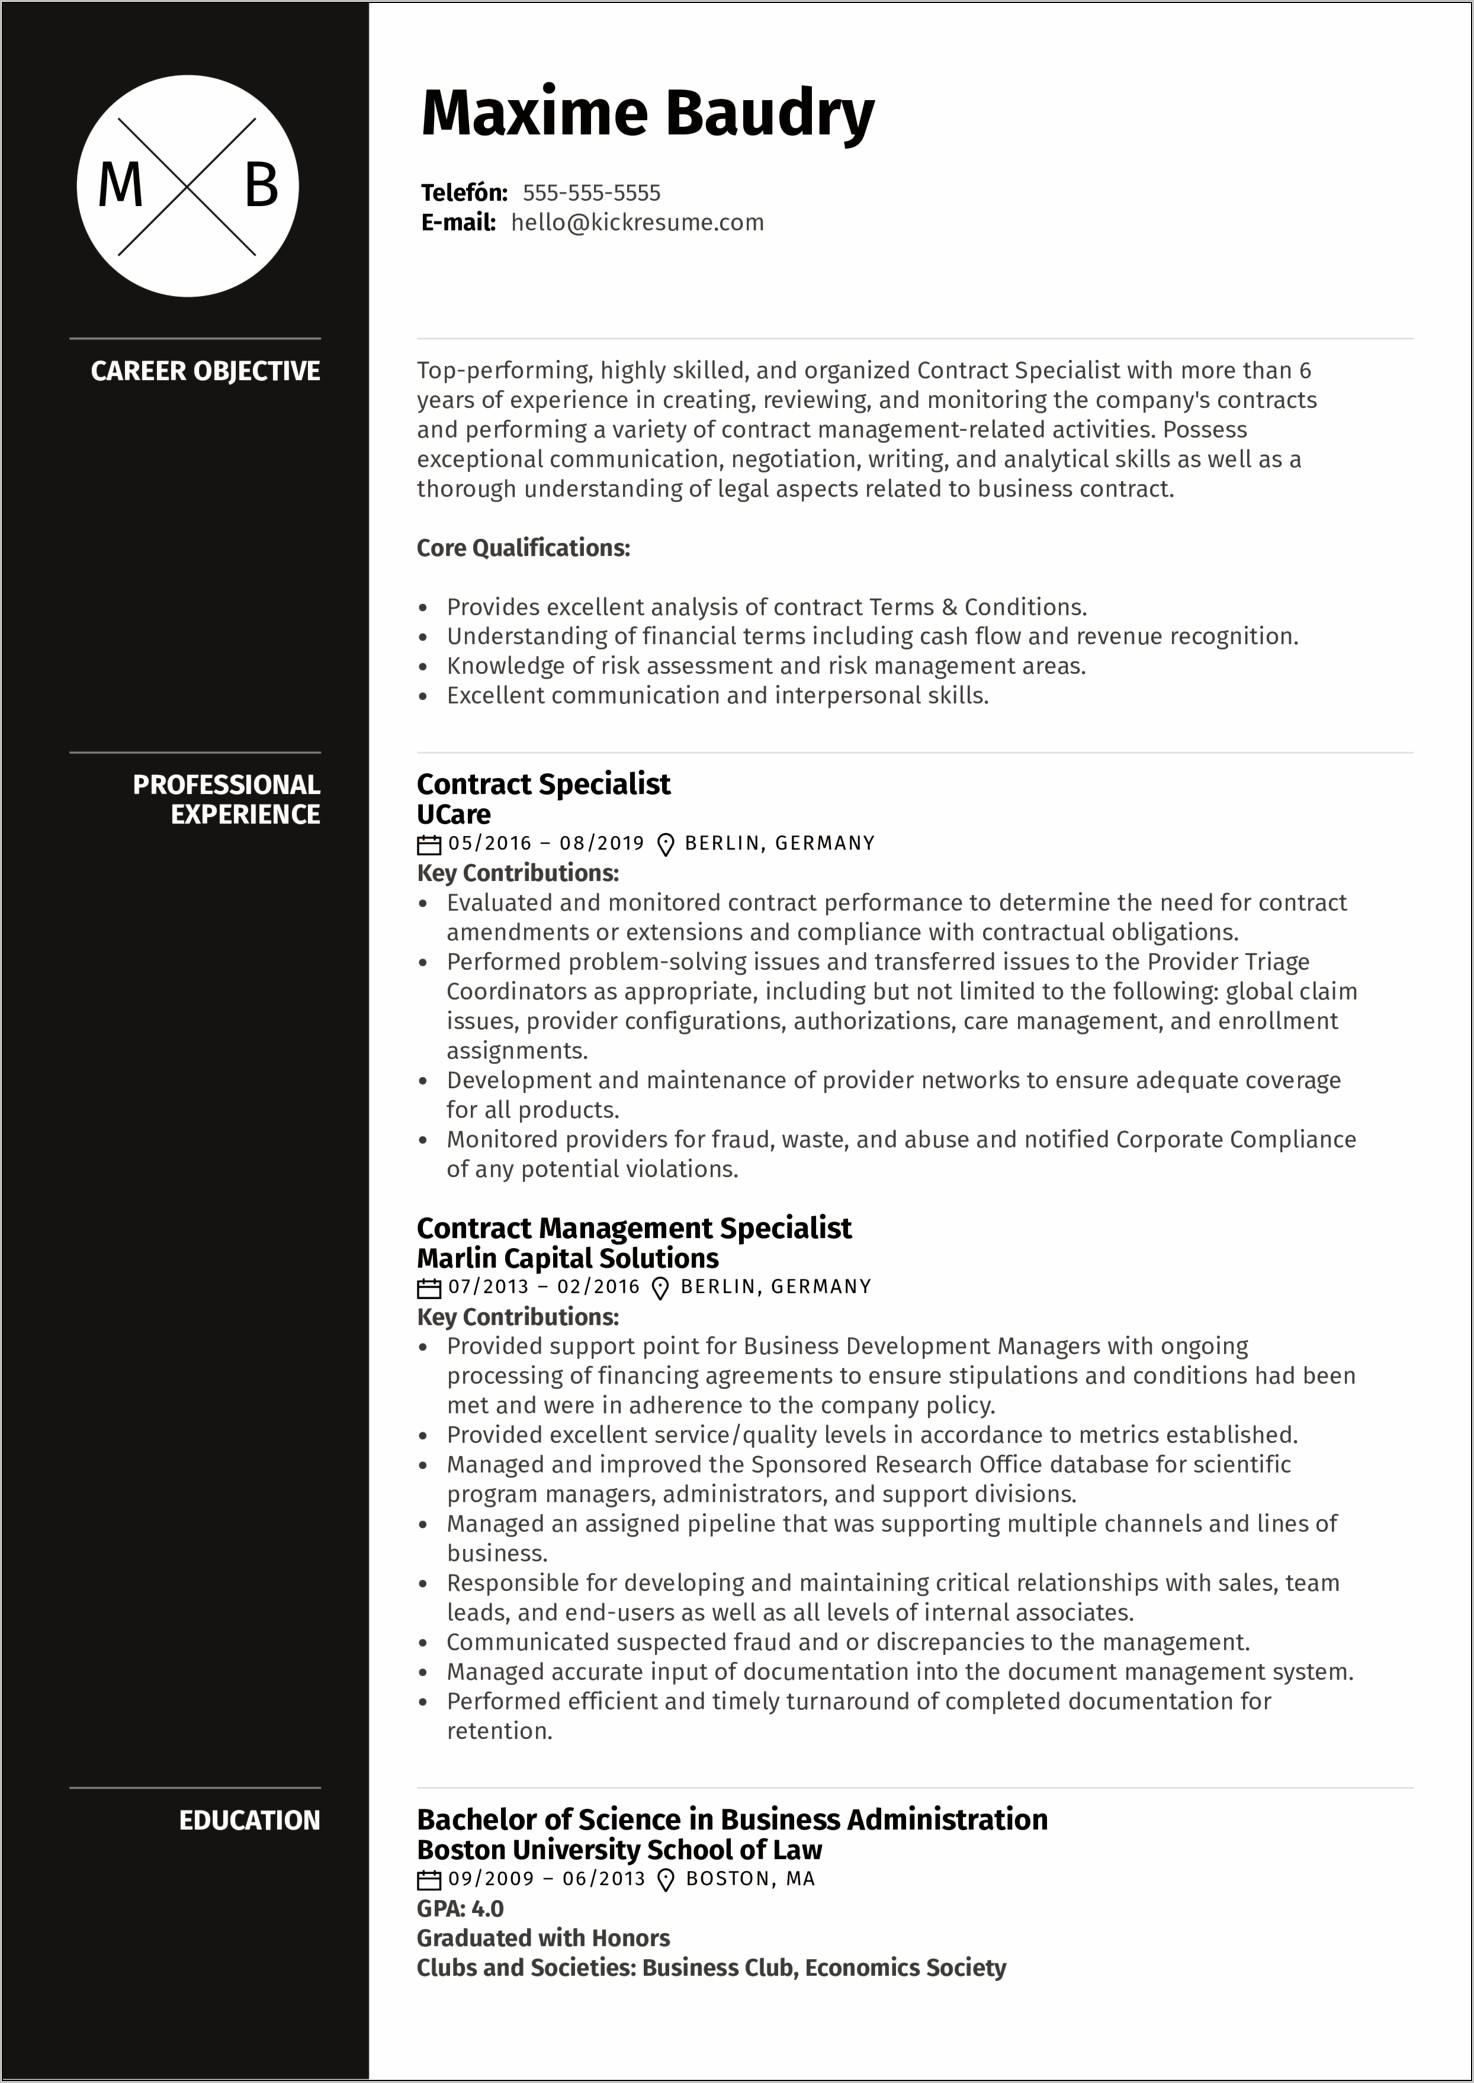 Resume Objectives For Contract Work